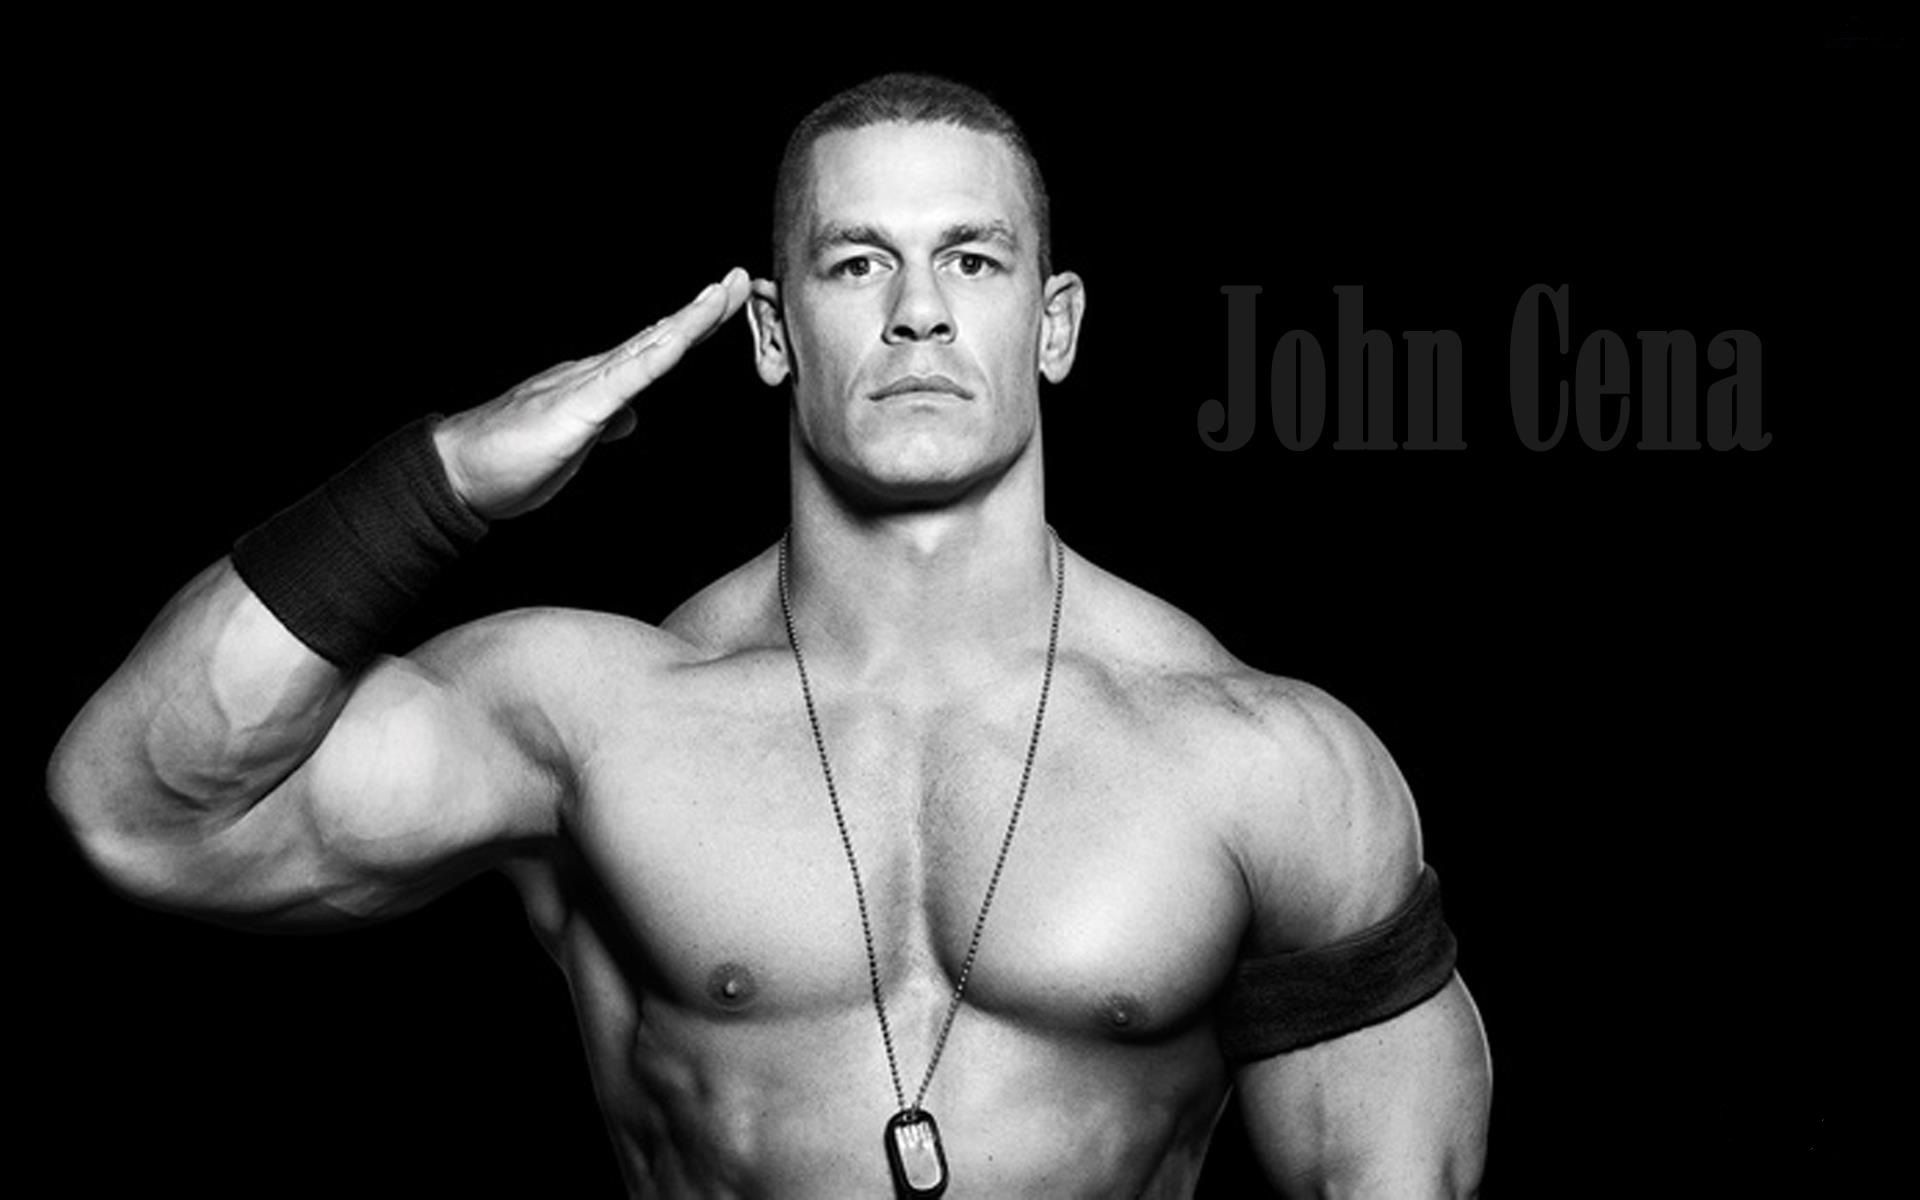 John Cena movies, Download wallpapers, Latest collection, Desktop and mobile, 1920x1200 HD Desktop